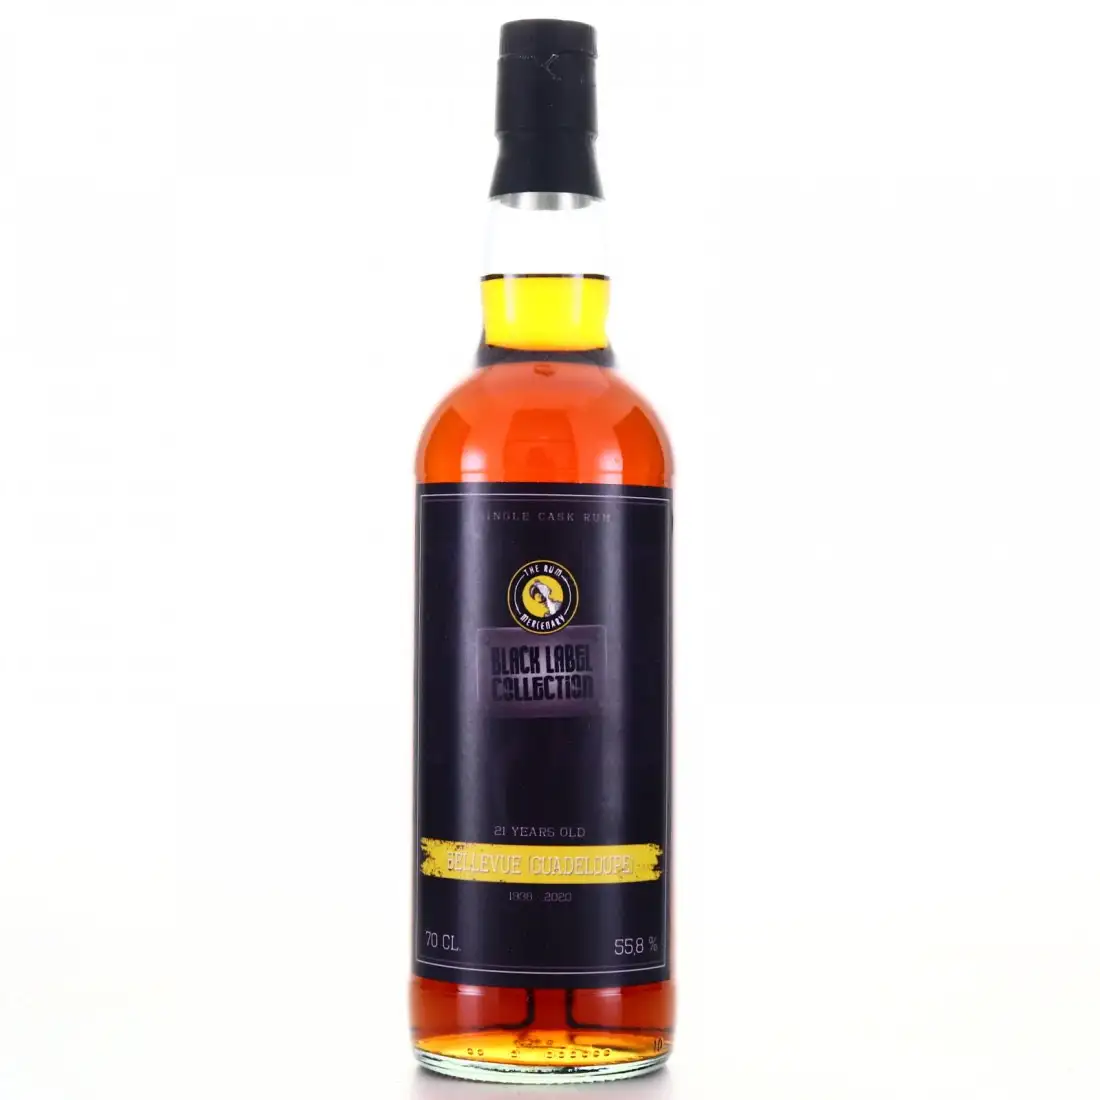 Image of the front of the bottle of the rum Black Label Collection